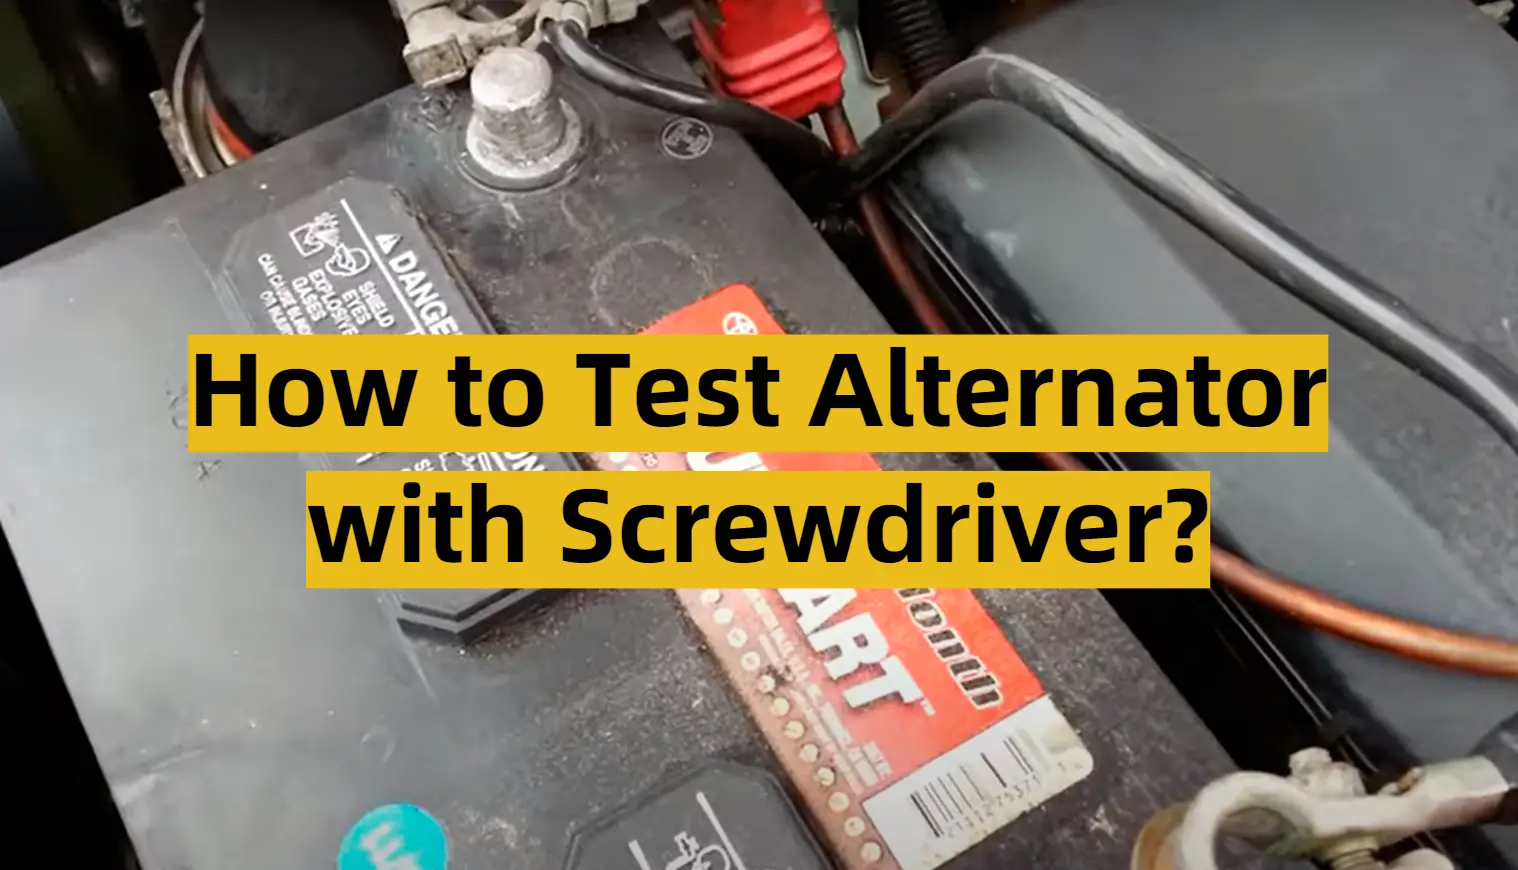 How to Test Alternator with Screwdriver?